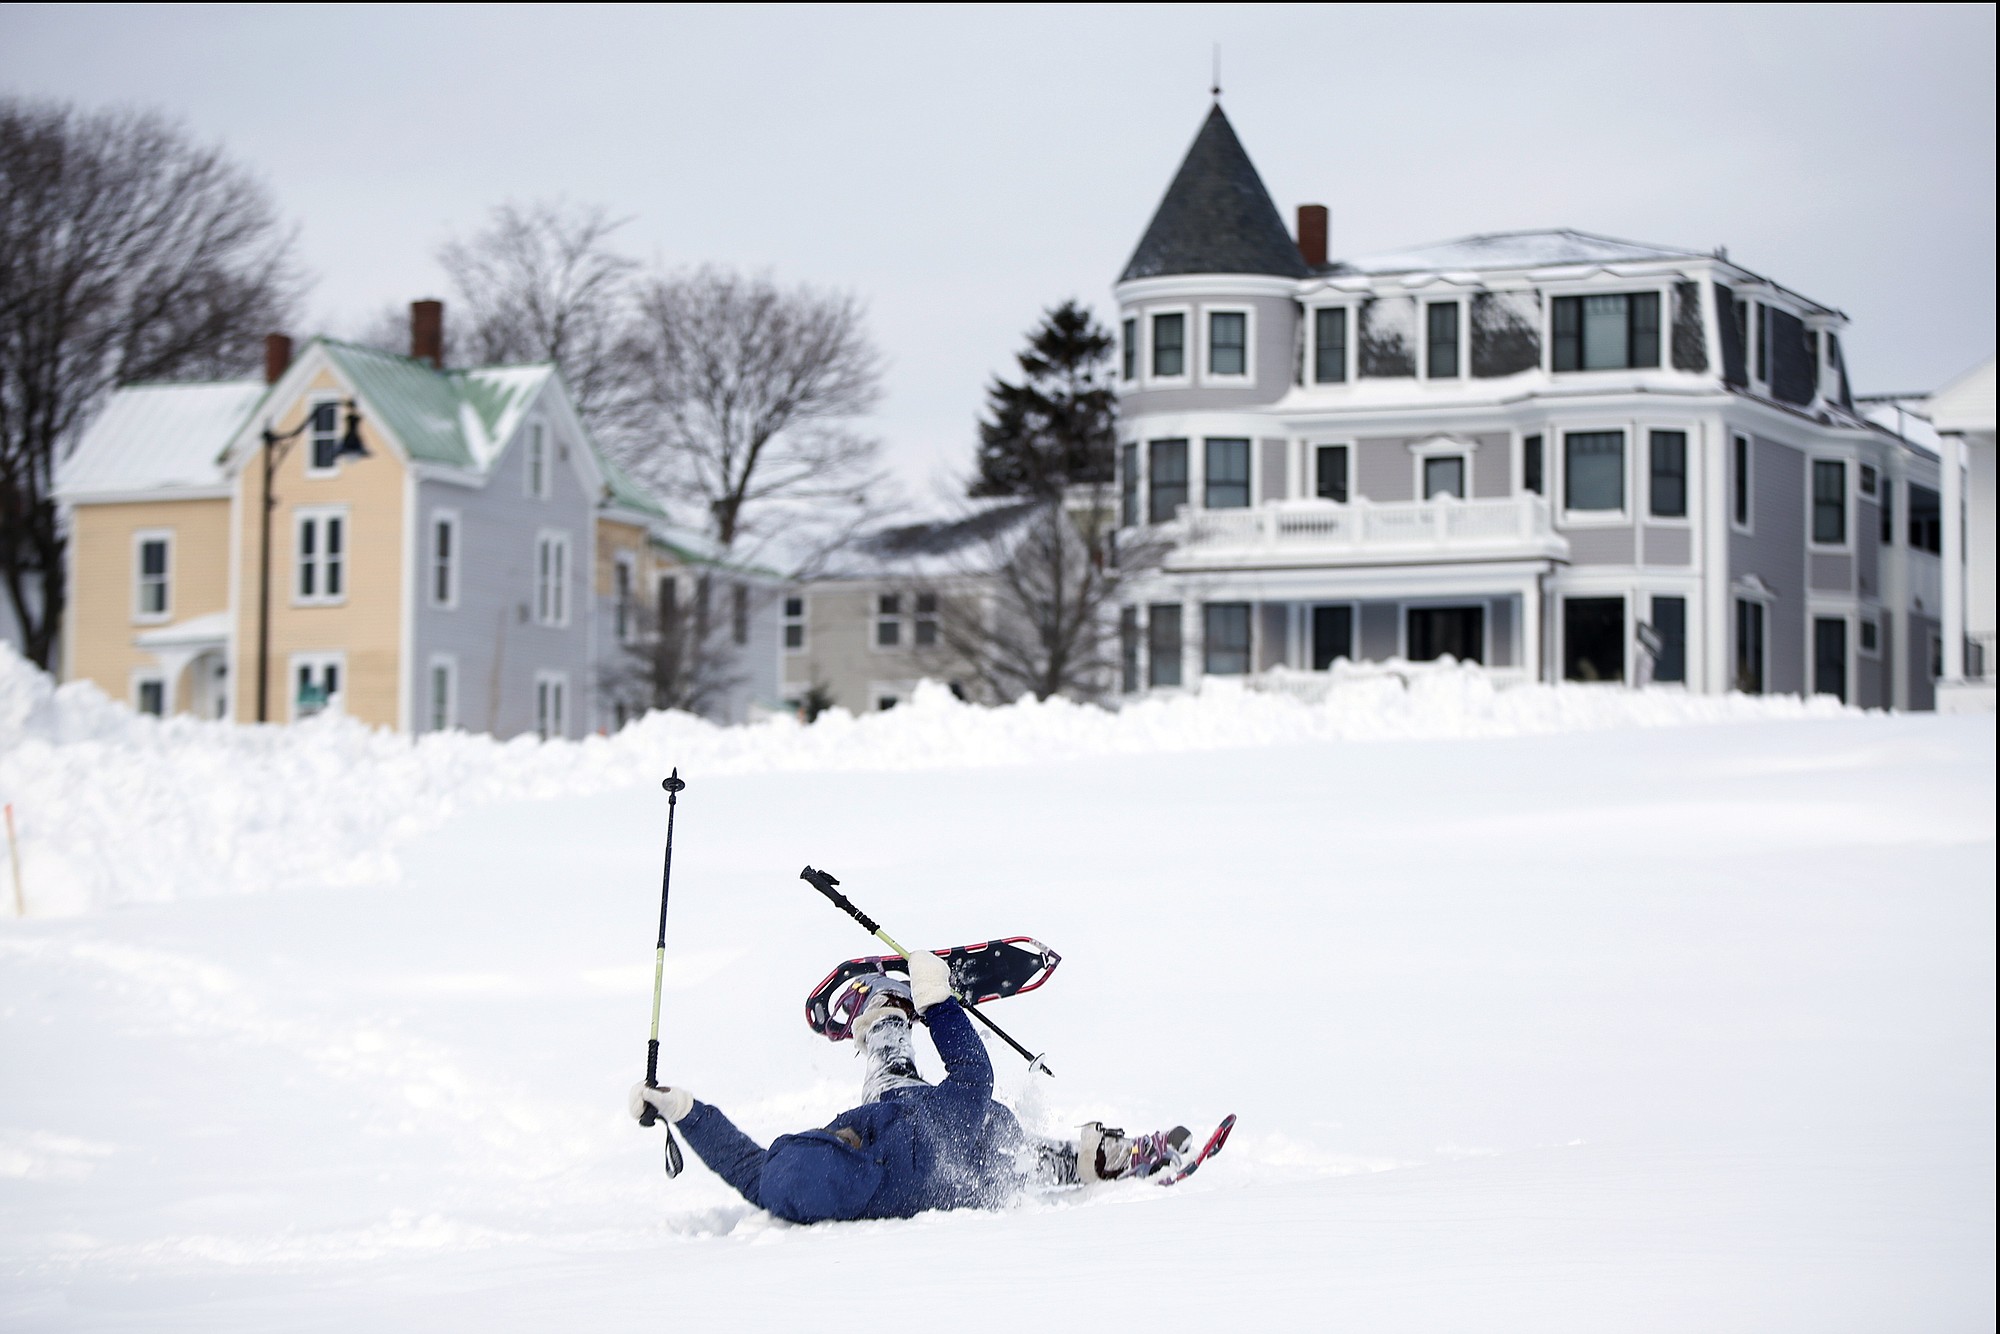 After several failed attempts to get up after falling in a deep snowdrift on the Eastern Promenade, Sandy Asmussen, 65, rolls over on her back to frees her snowshoes Wednesday in Portland, Maine.